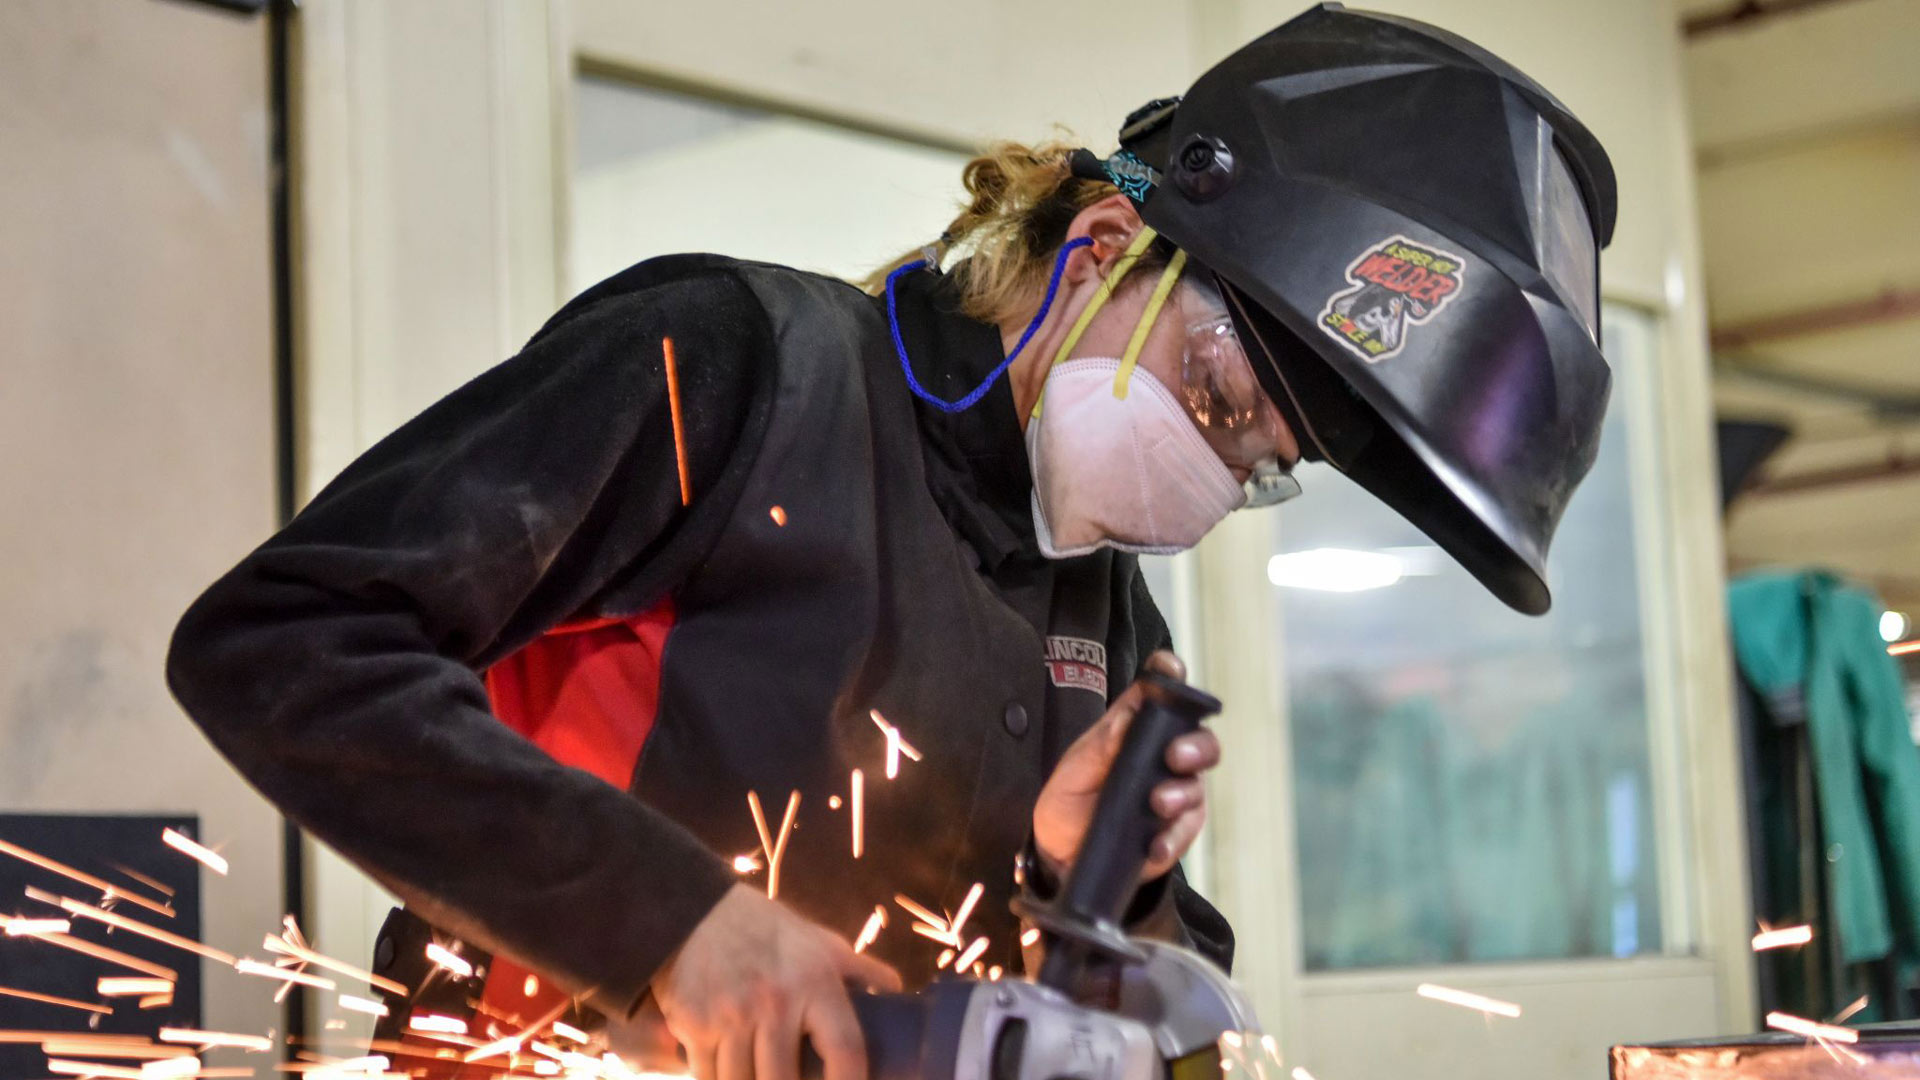 A worker demonstrates her skills at the Chicago Women in Trades facility. Illinois was one of the top 10 states for union representation last year, at 13.9% of workers, more than 2.5 times Arizona’s rate of 5.4%, despite slow gains in the state.